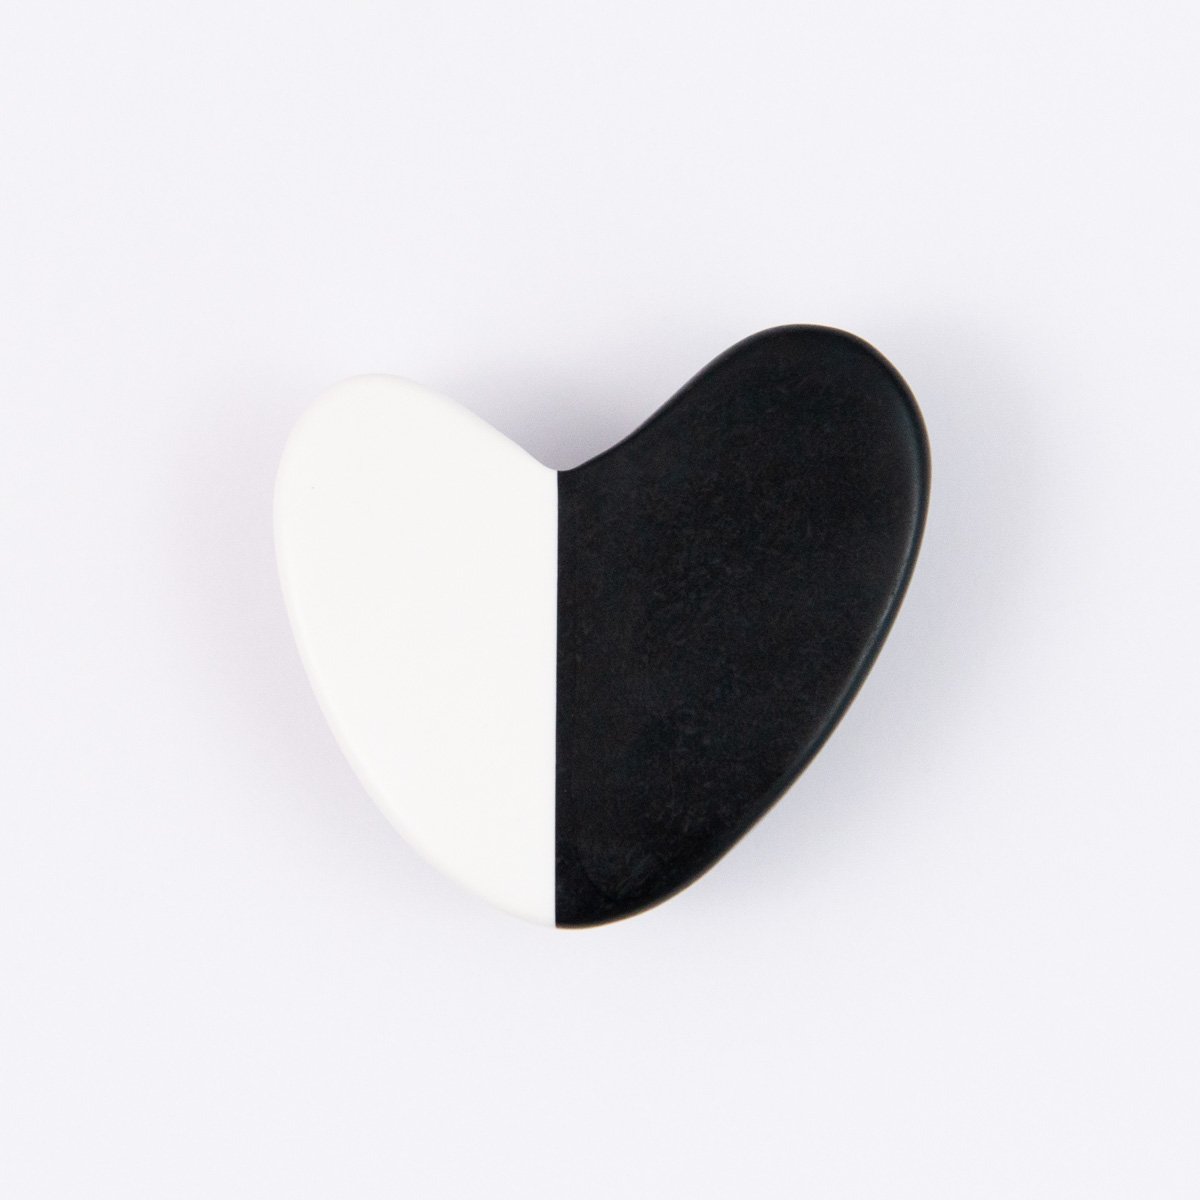 Black and white heart shaped brooch on white background.